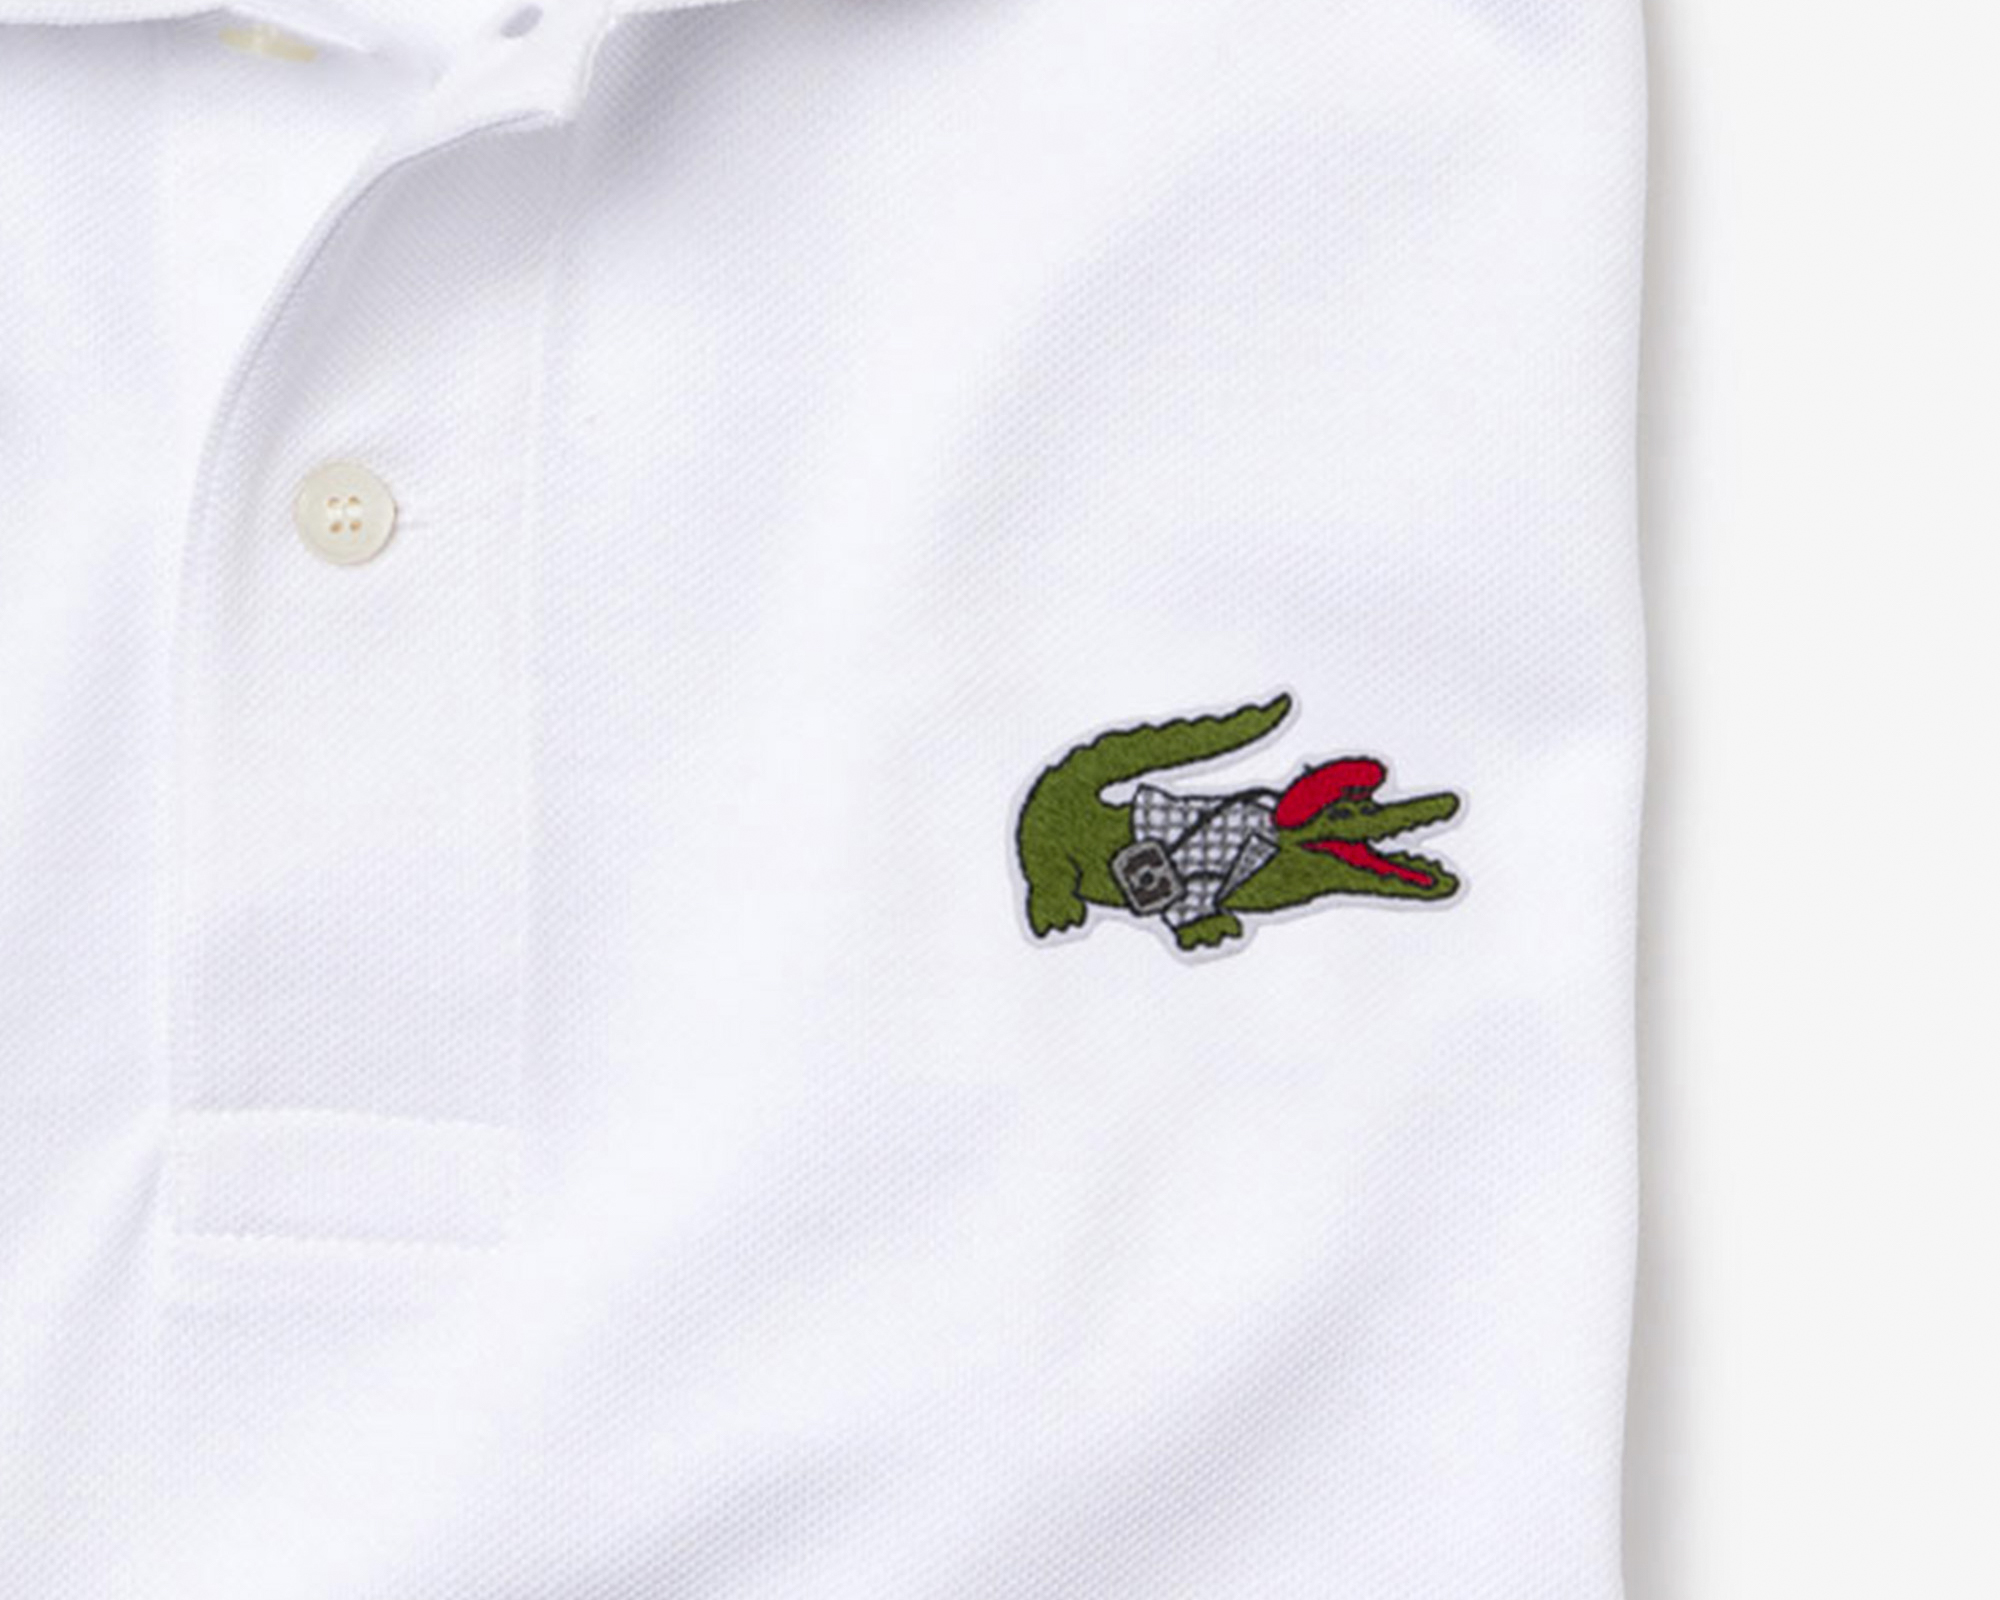 Lacoste on X: "Everything? Then you want your limited-edition Emily in Paris patch! Available online and at Lacoste Arena in Paris &amp; Regent Street Store in London. https://t.co/eg7DGk2aQQ" / X